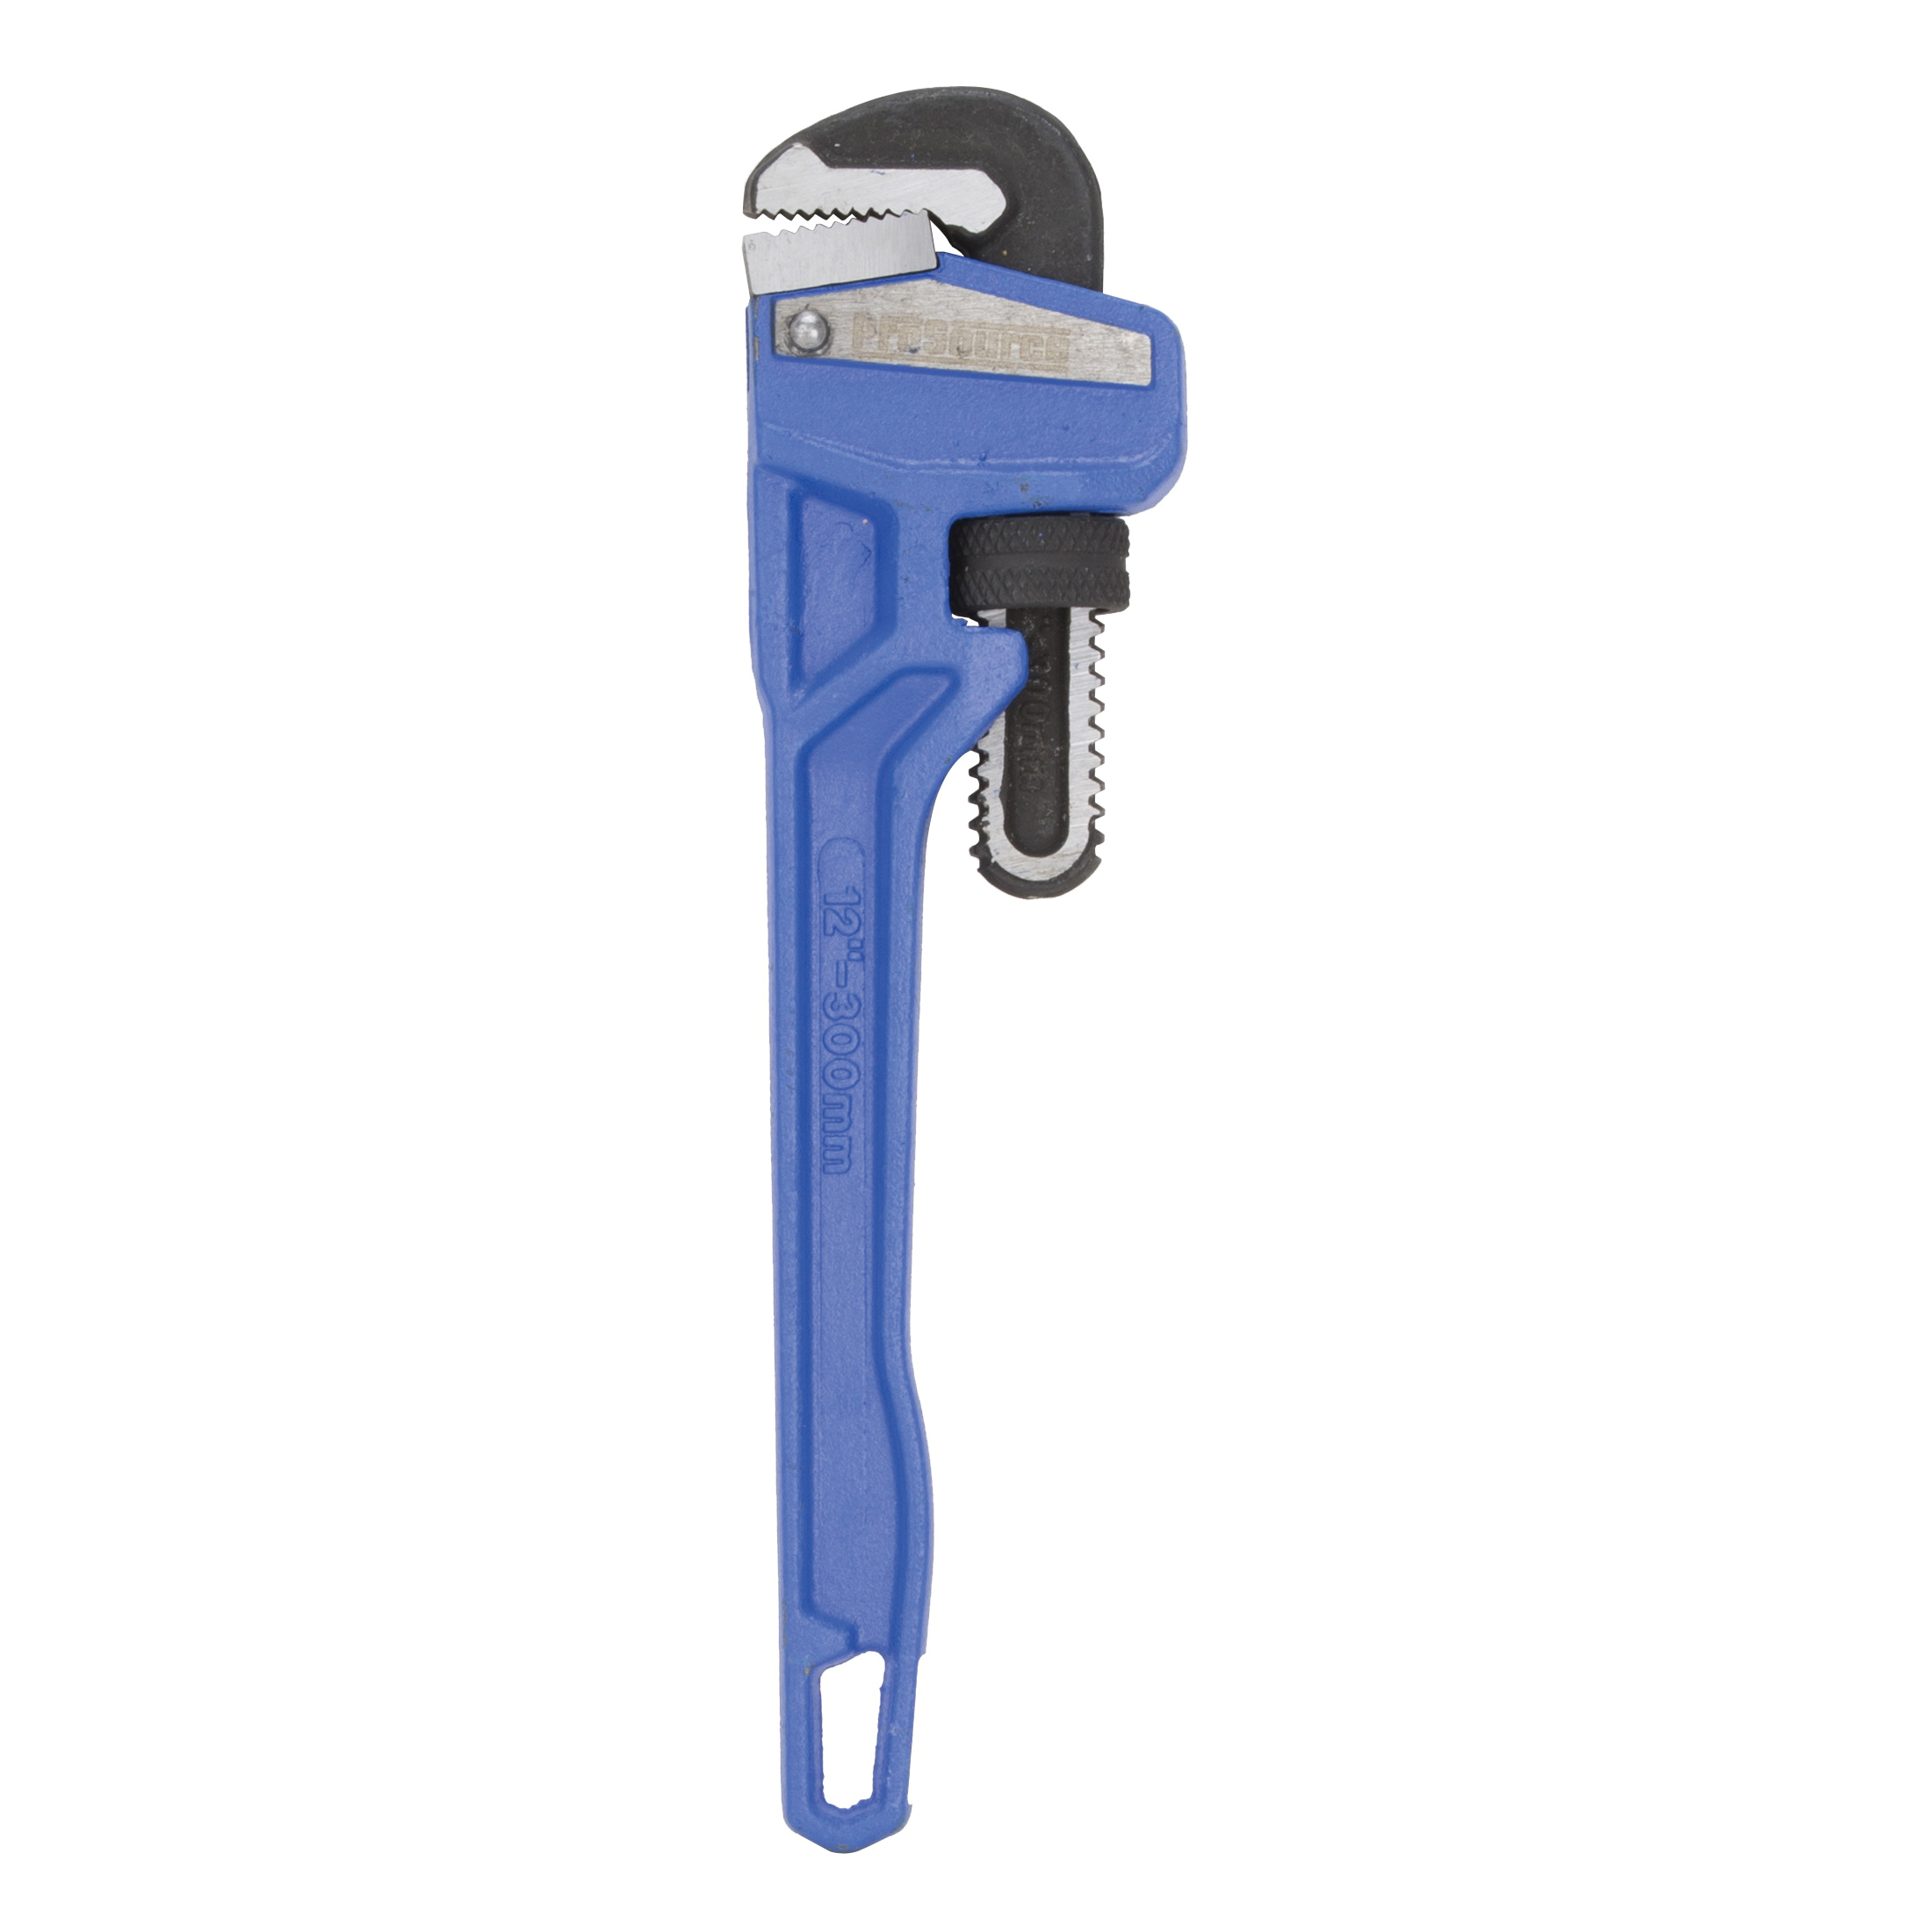 JL40112 Pipe Wrench, 32 mm Jaw, 12 in L, Serrated Jaw, Die-Cast Carbon Steel, Powder-Coated, Heavy-Duty Handle